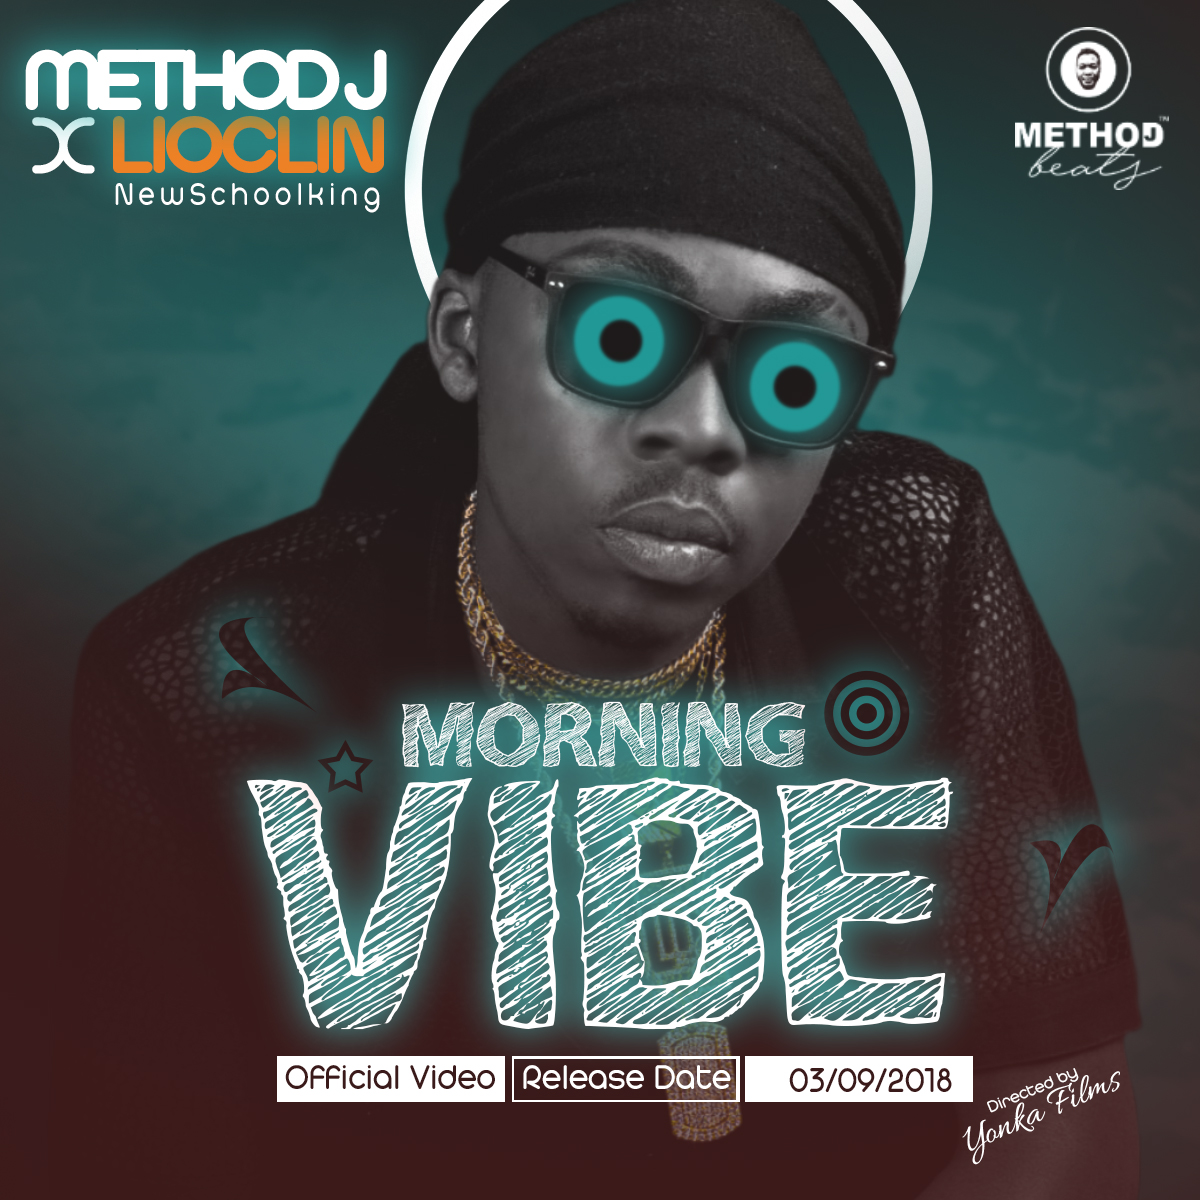 Method J Beats Releases Official Video For Morning Vibe Featuring Bamenda New School King Leoclin Audio Video Included The Hotjem 1 Pan African Media Outlet For News Pop Culture Trends